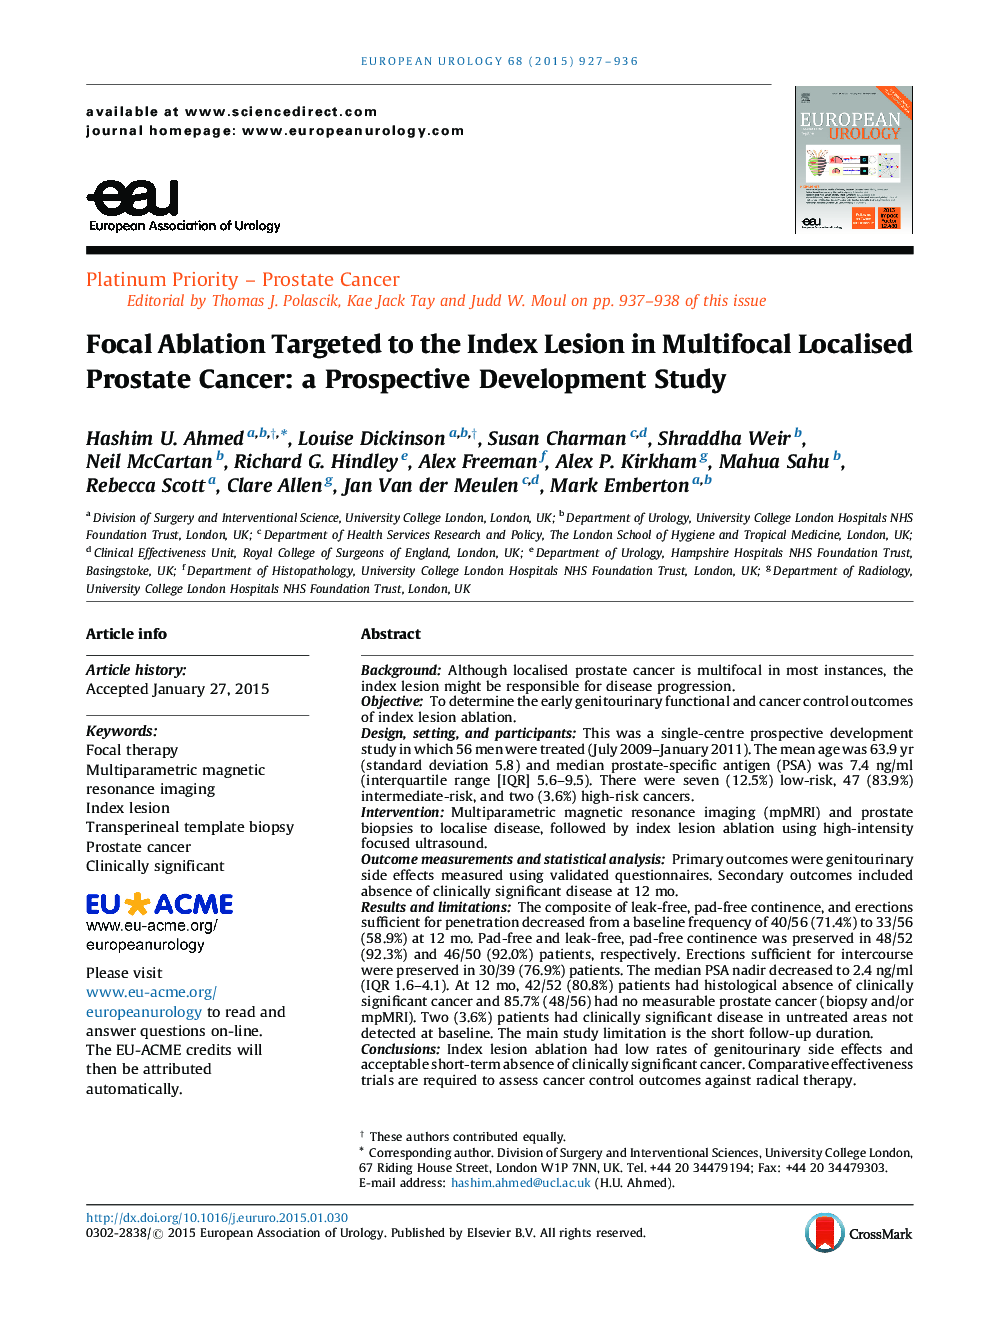 Focal Ablation Targeted to the Index Lesion in Multifocal Localised Prostate Cancer: a Prospective Development Study 